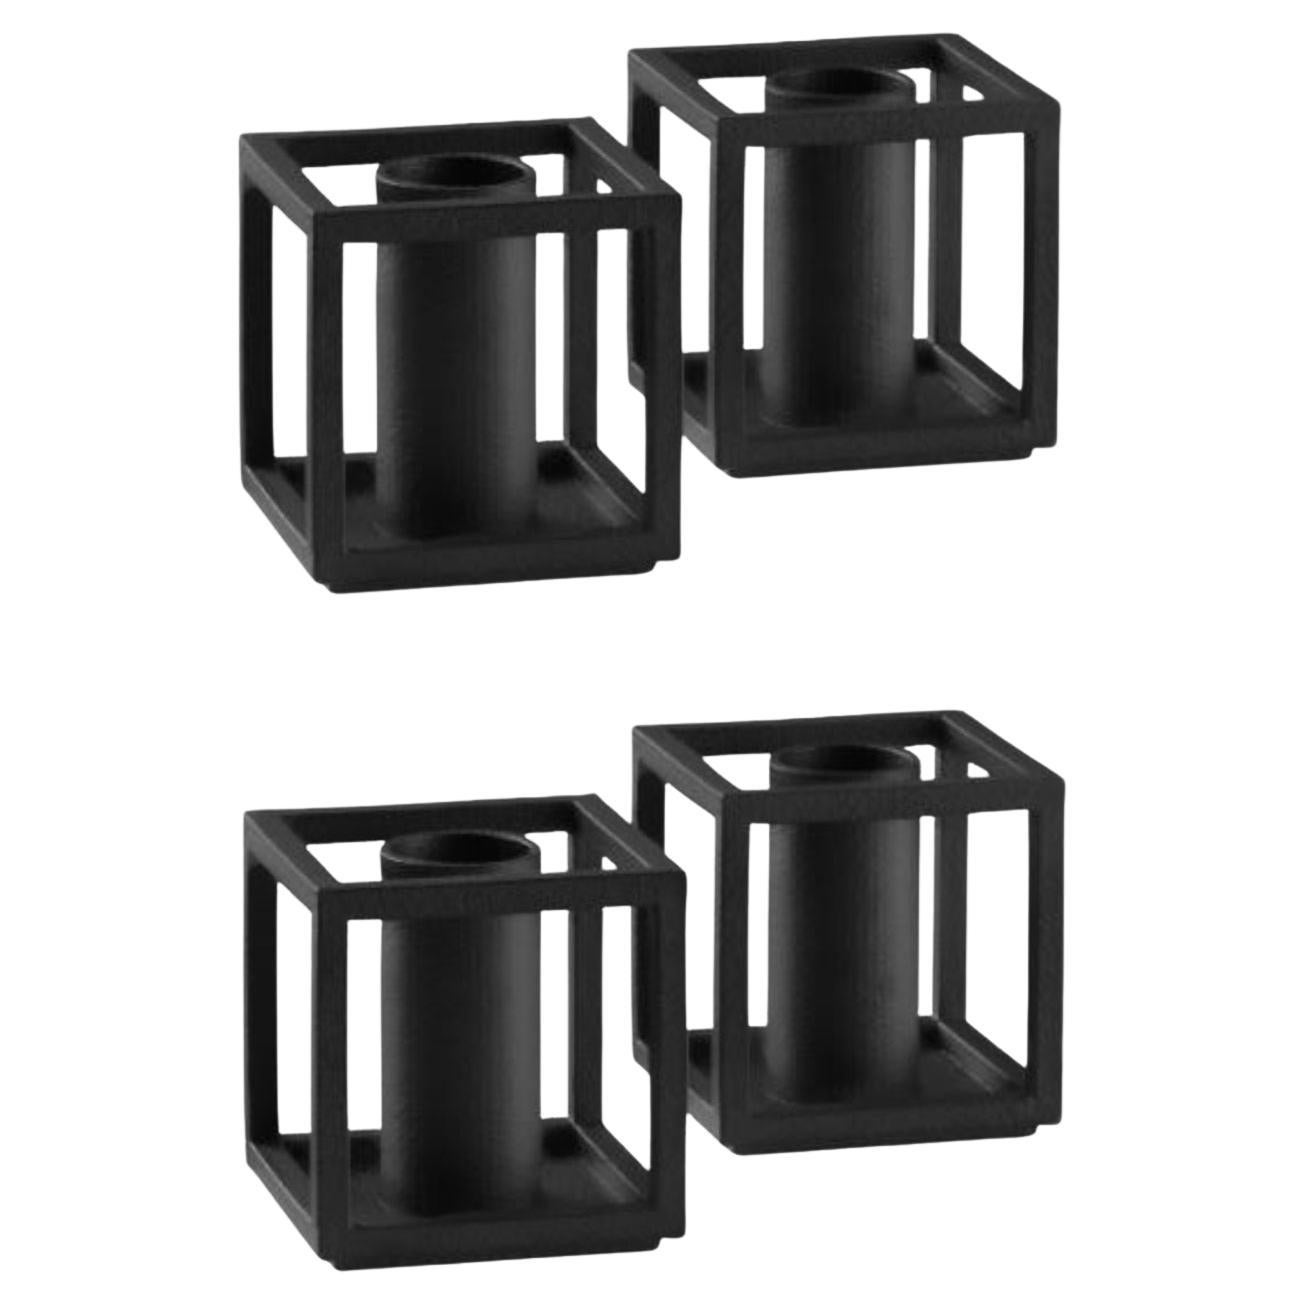 Set of 4 Black Kubus Micro Candle Holders by Lassen For Sale